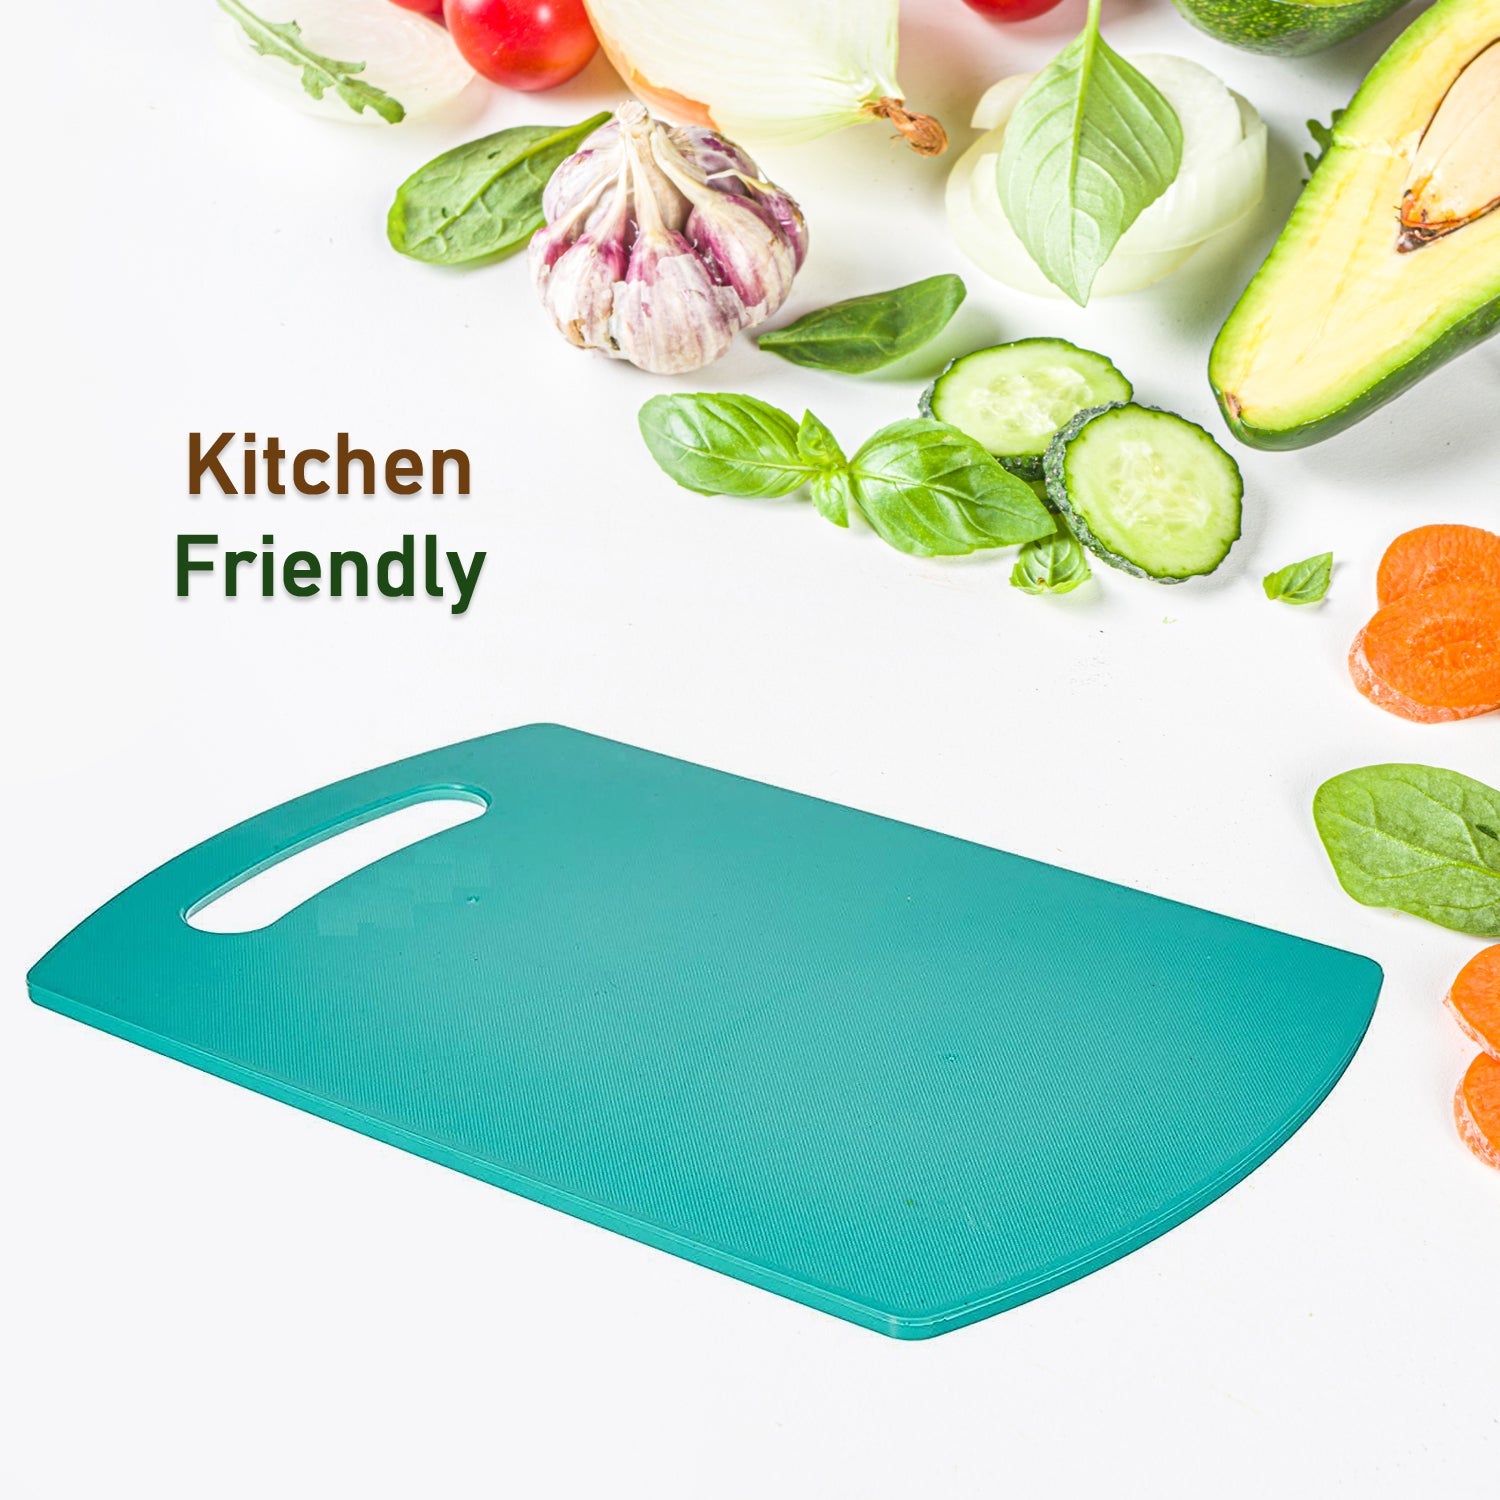 0086A Chopping Board Cutting Pad Plastic for Home and Kitchen Accessories Items Tools Gadgets for Cutting Vegetables Non Sleep Anti Skid